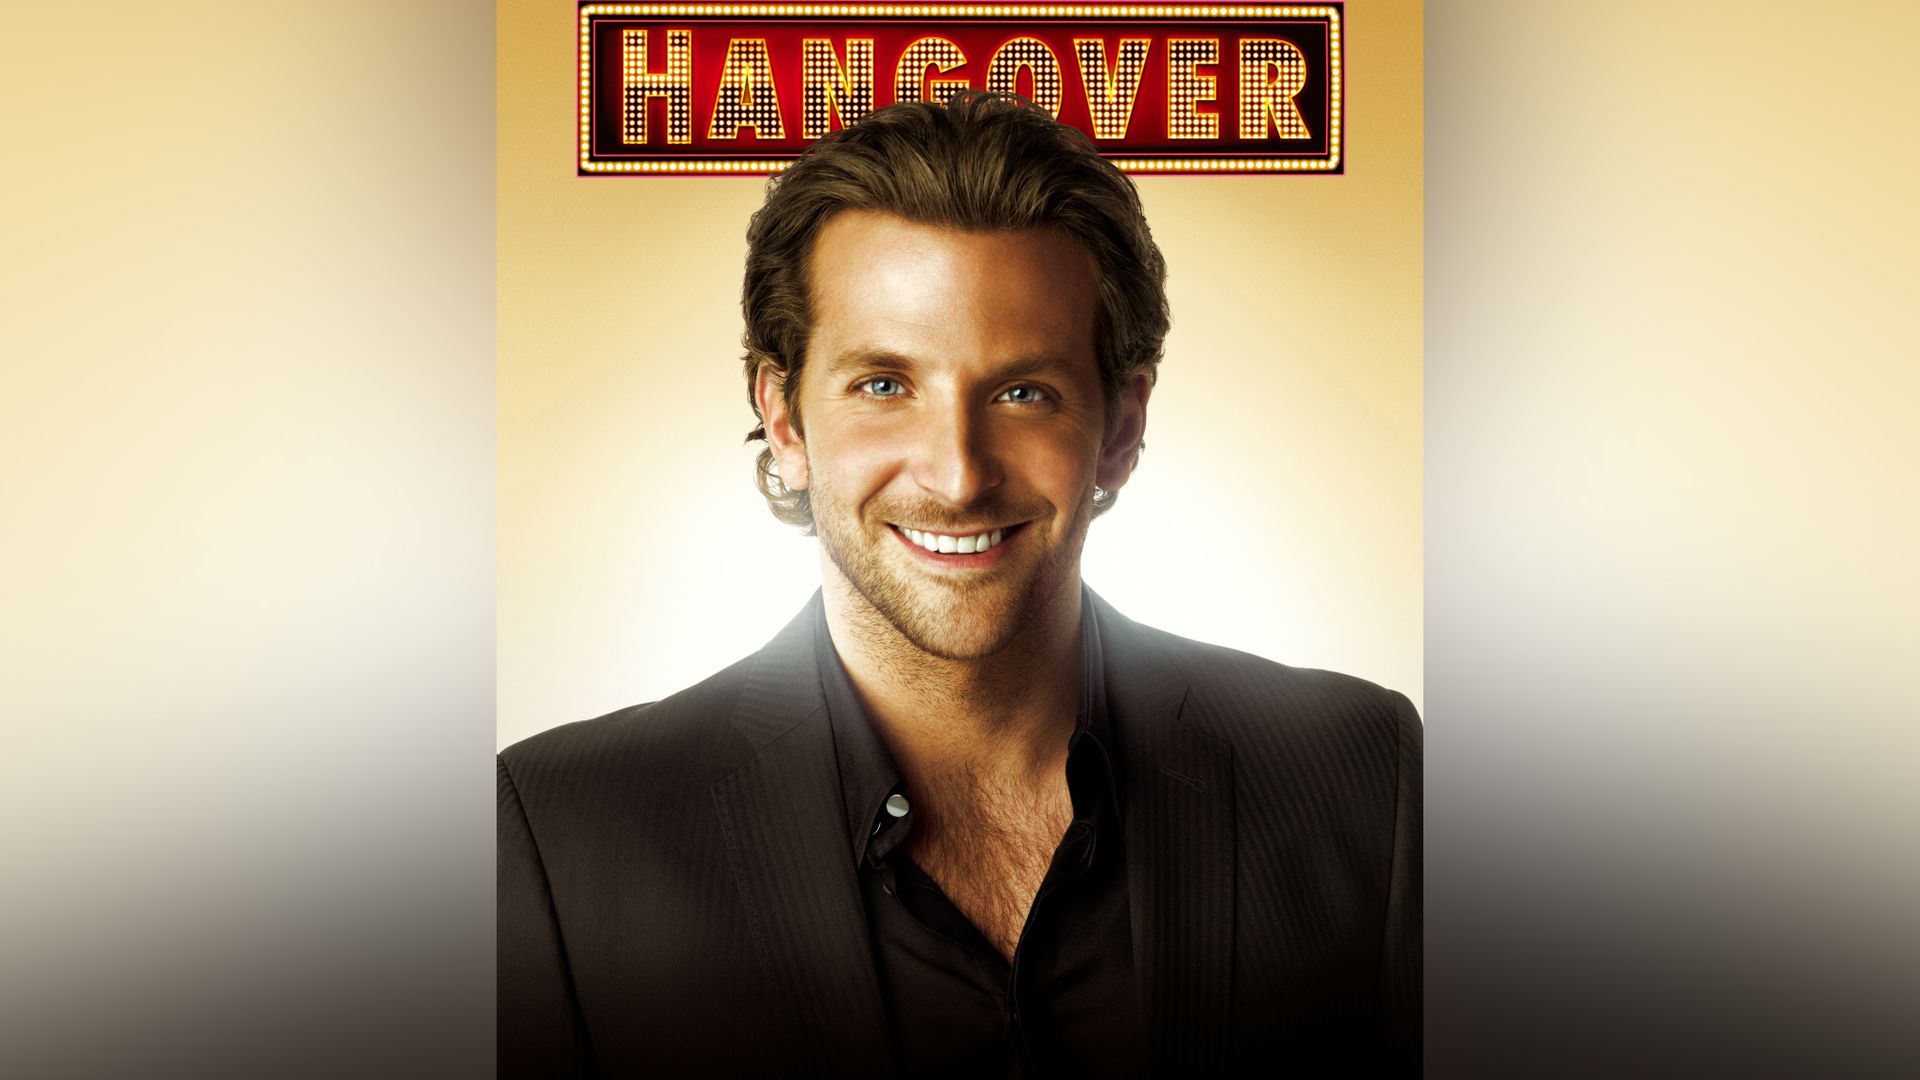 After The Hangover Bradley Cooper became one of the most significant actors